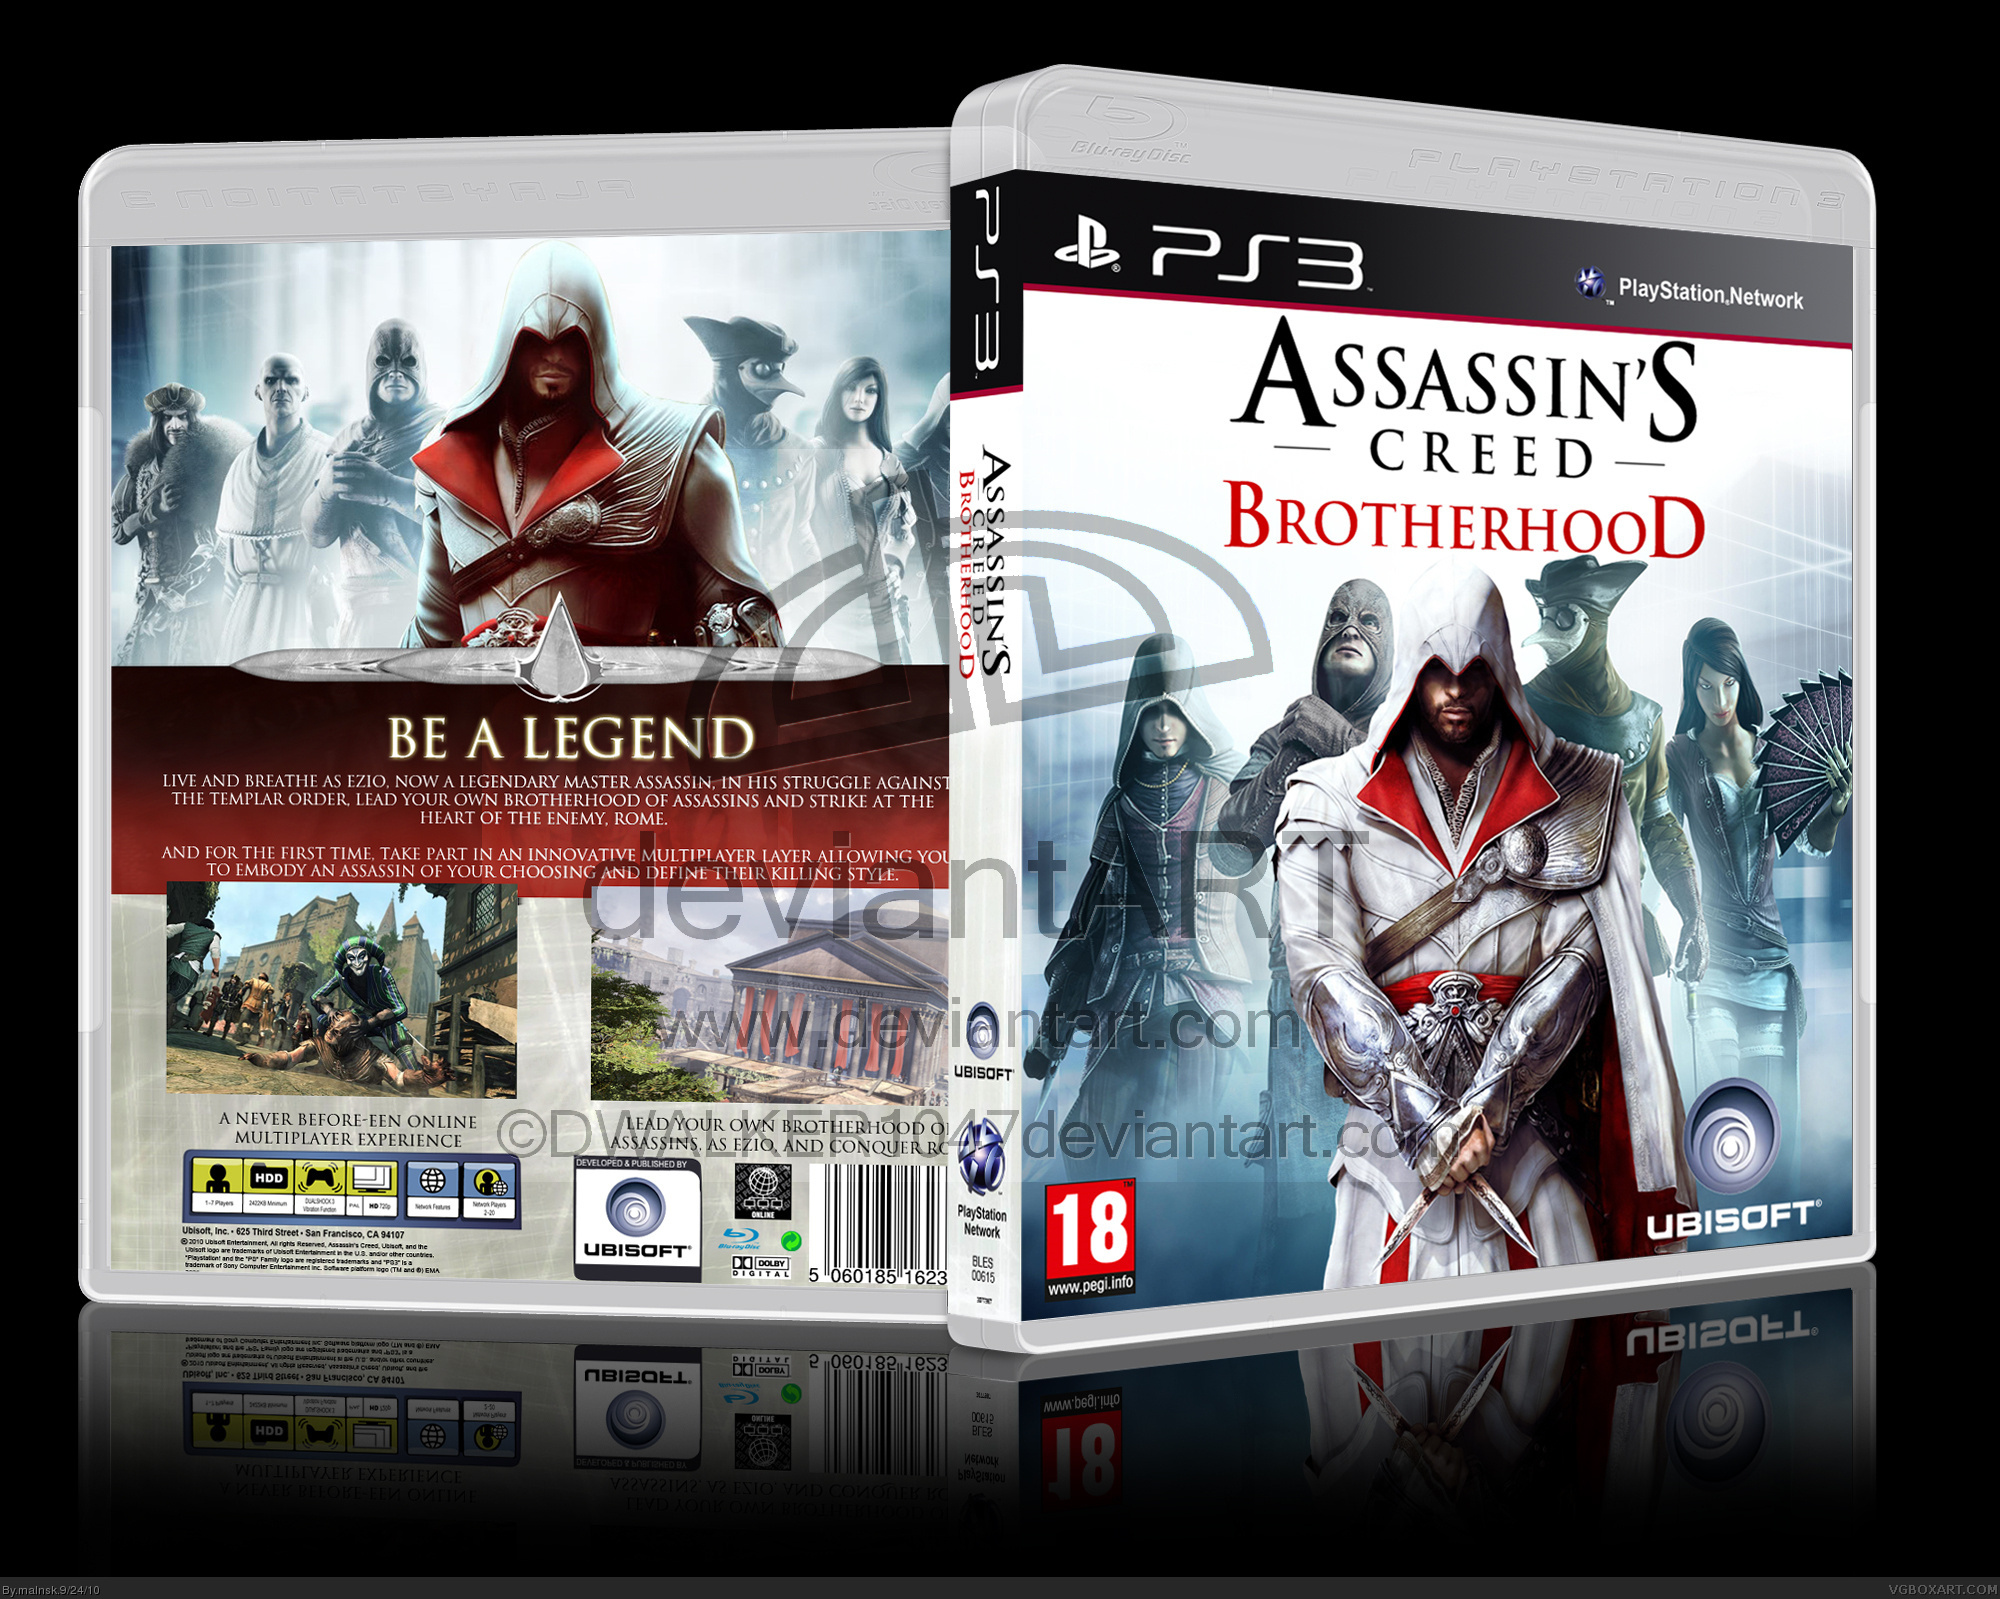 Viewing full size Assassin's Creed: Brotherhood box cover